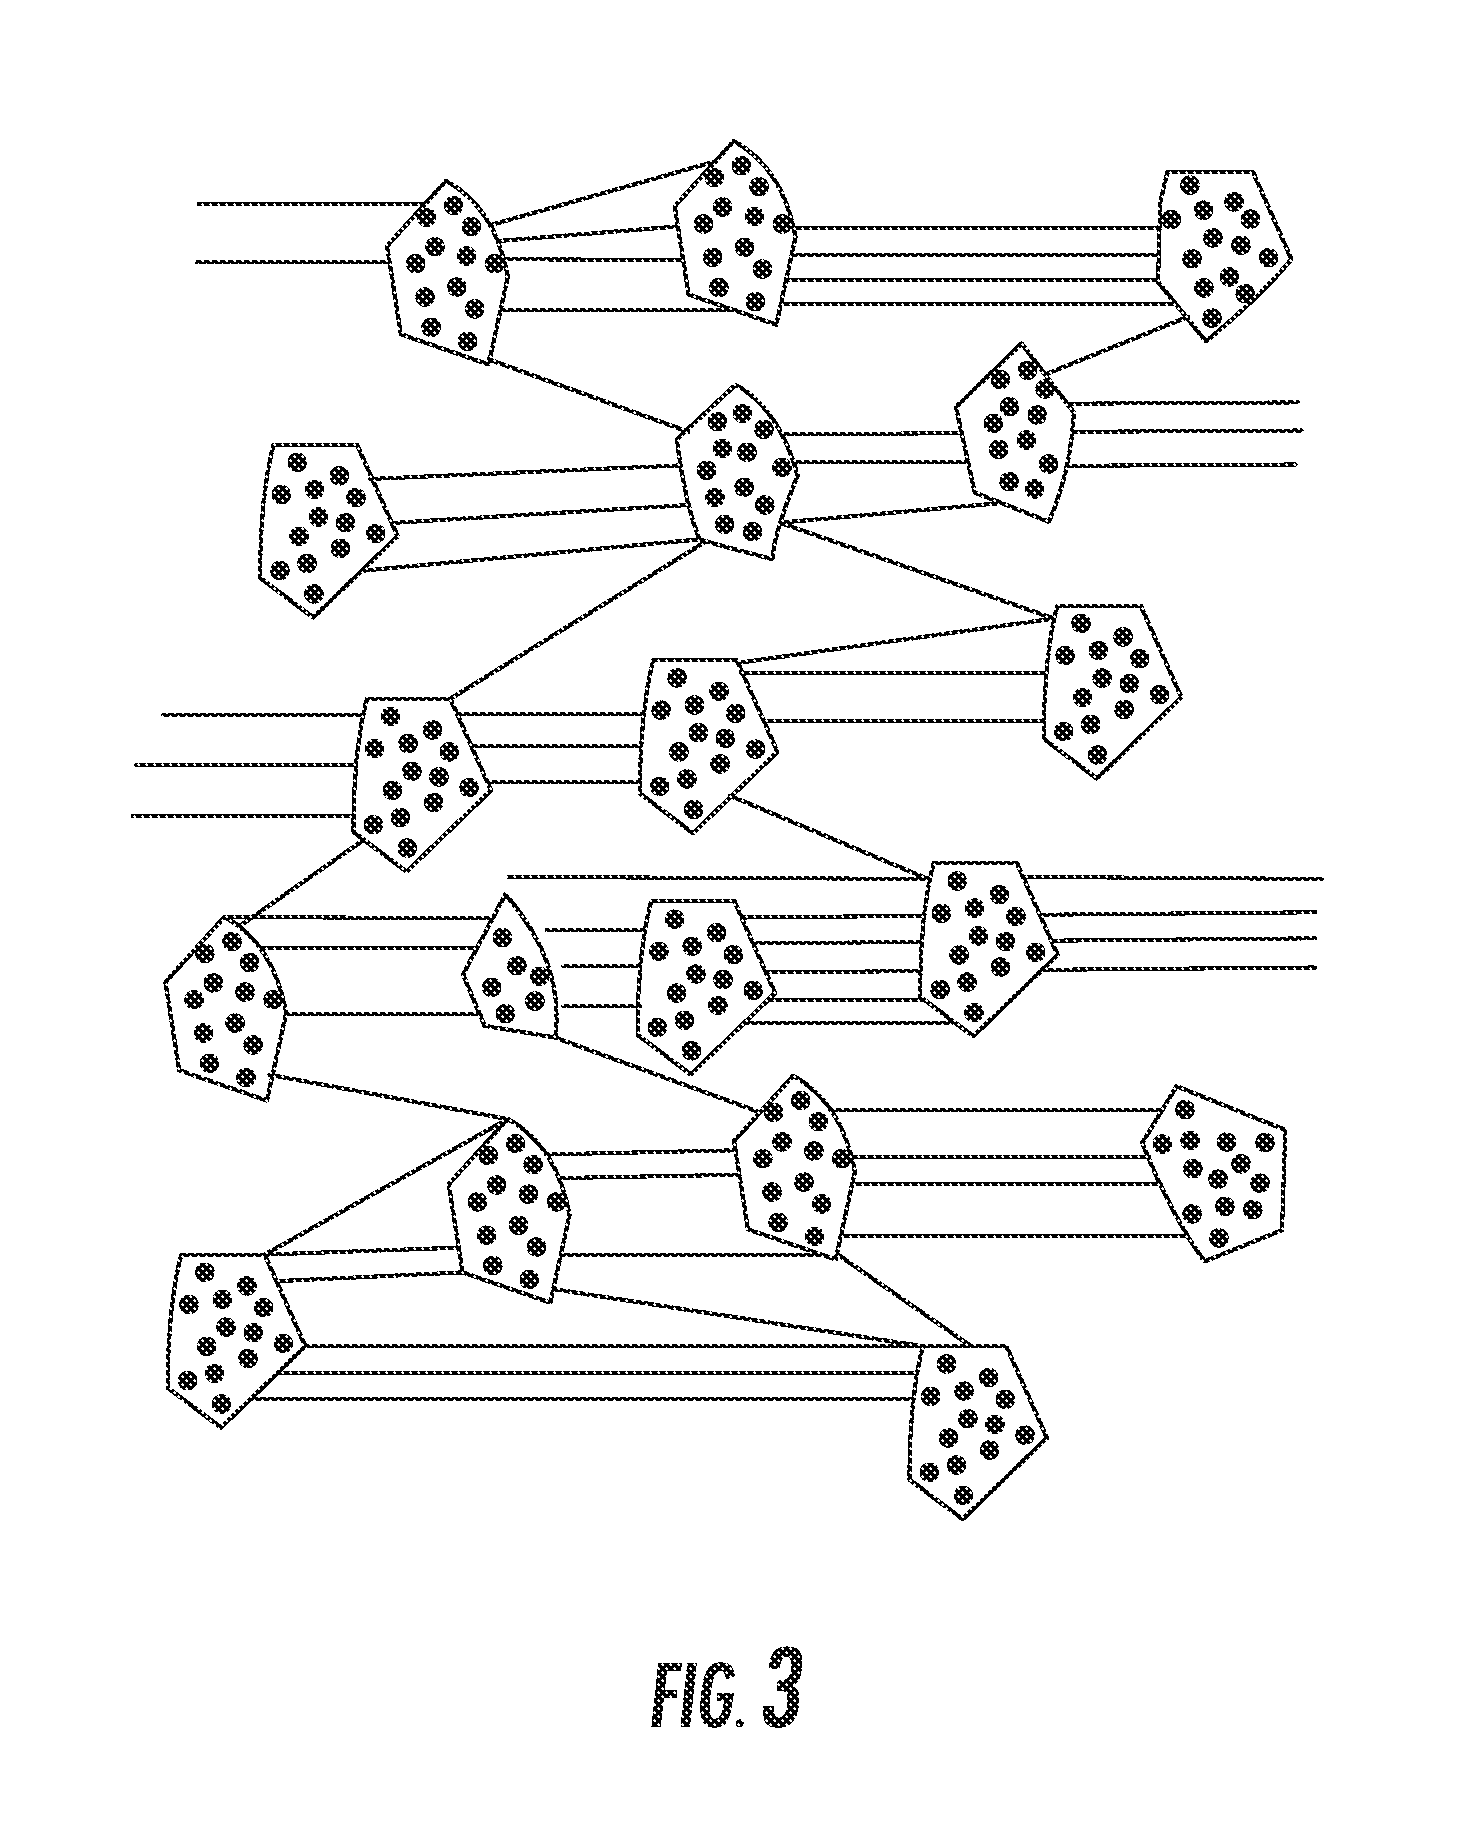 Method and apparatus for rapid adsorption-desorption co2 capture